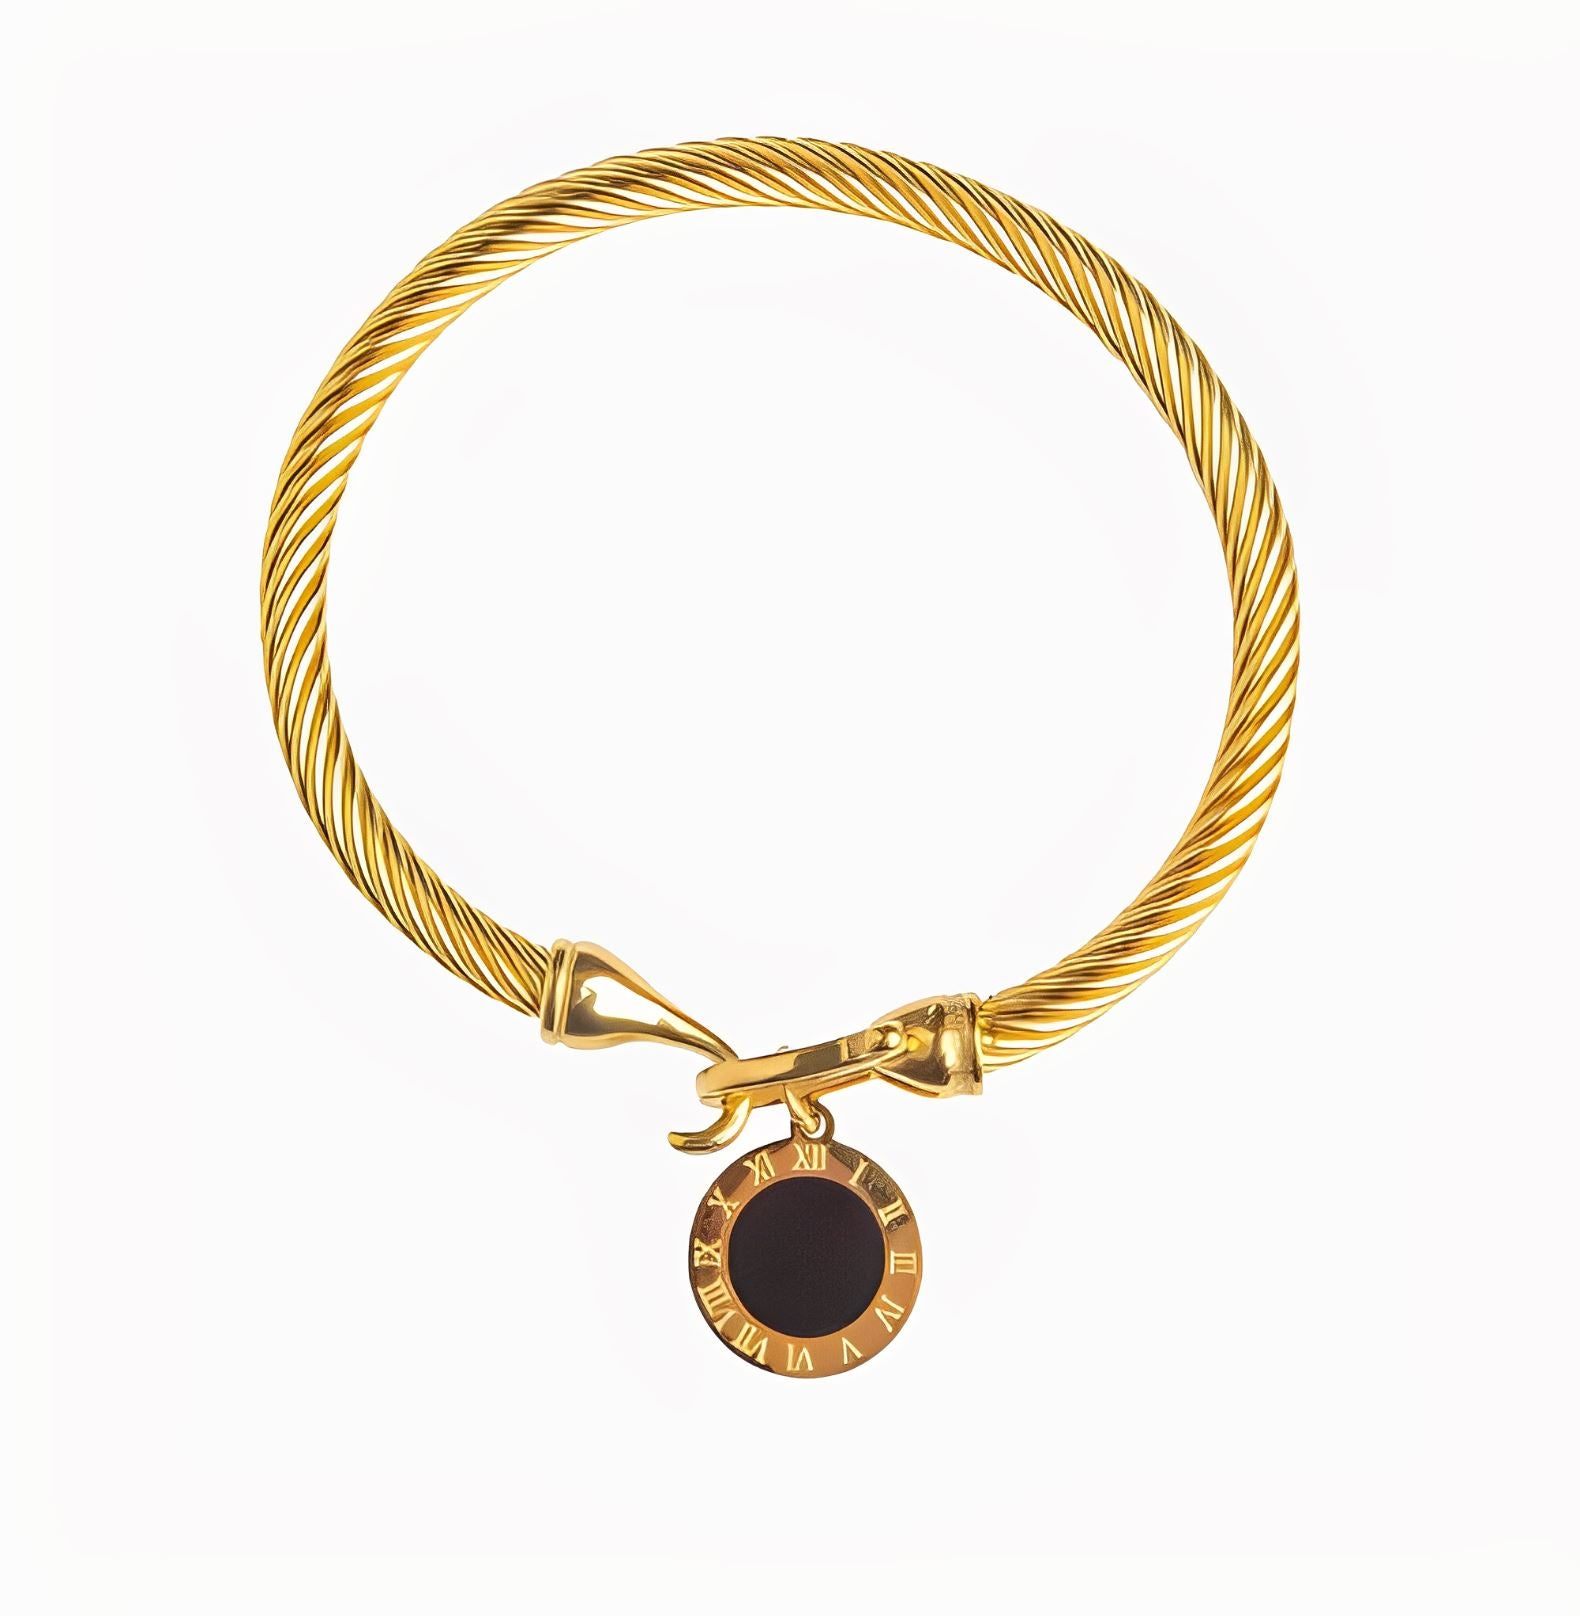 ONYX PENDANT BRACELET - GOLD braclet Yubama Jewelry Online Store - The Elegant Designs of Gold and Silver ! 